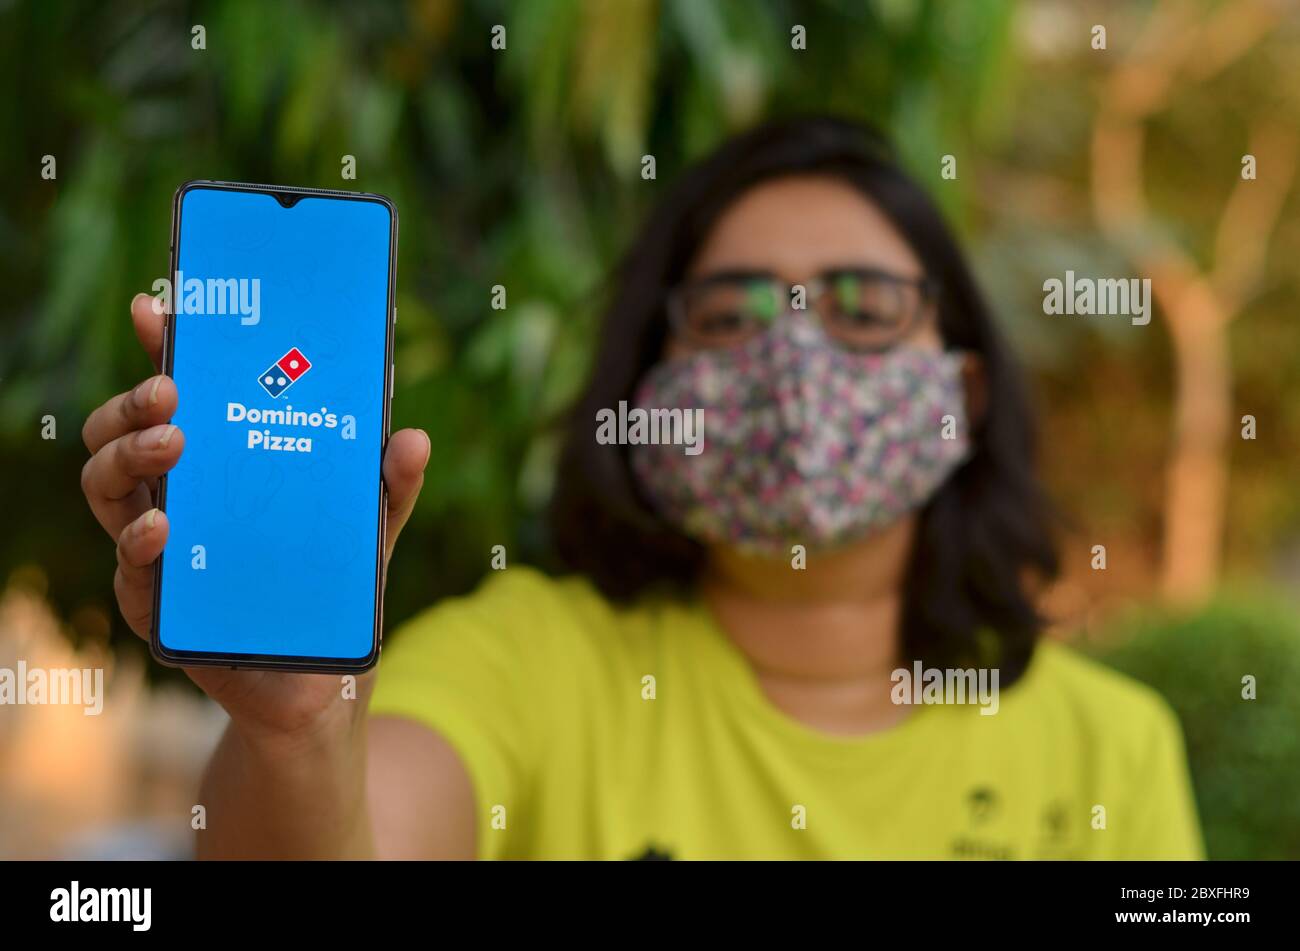 New Delhi, India, 2020. Portrait of a woman wearing a surgical mask holding a smartphone showing Domino's pizza delivery mobile app during coronavirus Stock Photo